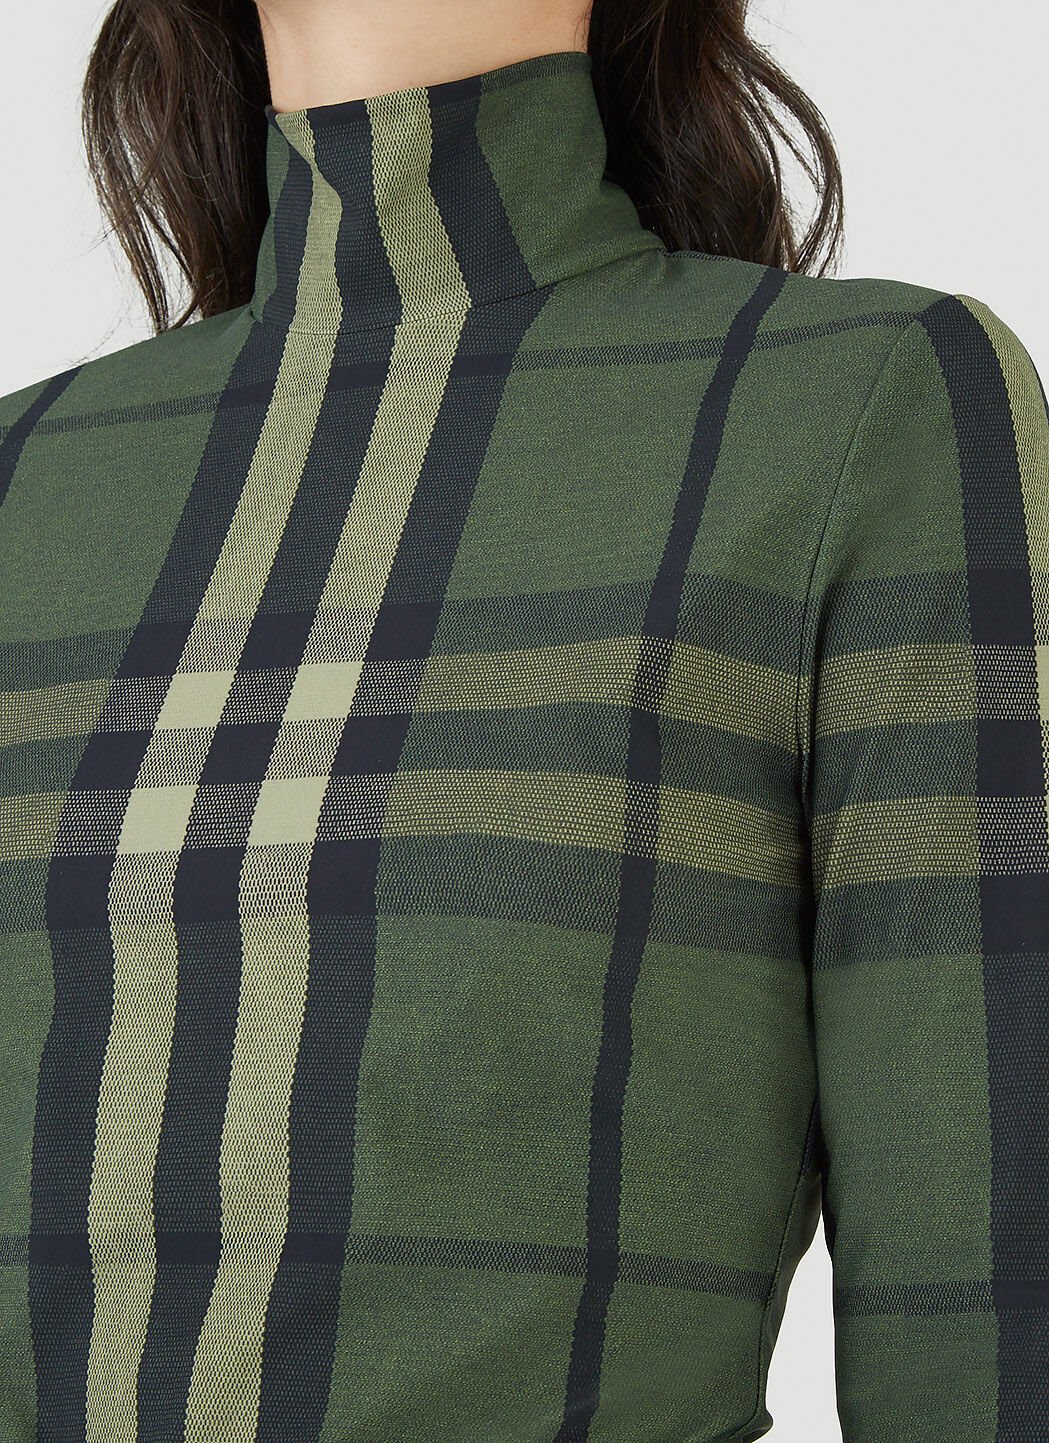 Burberry Emery Check Top in Green